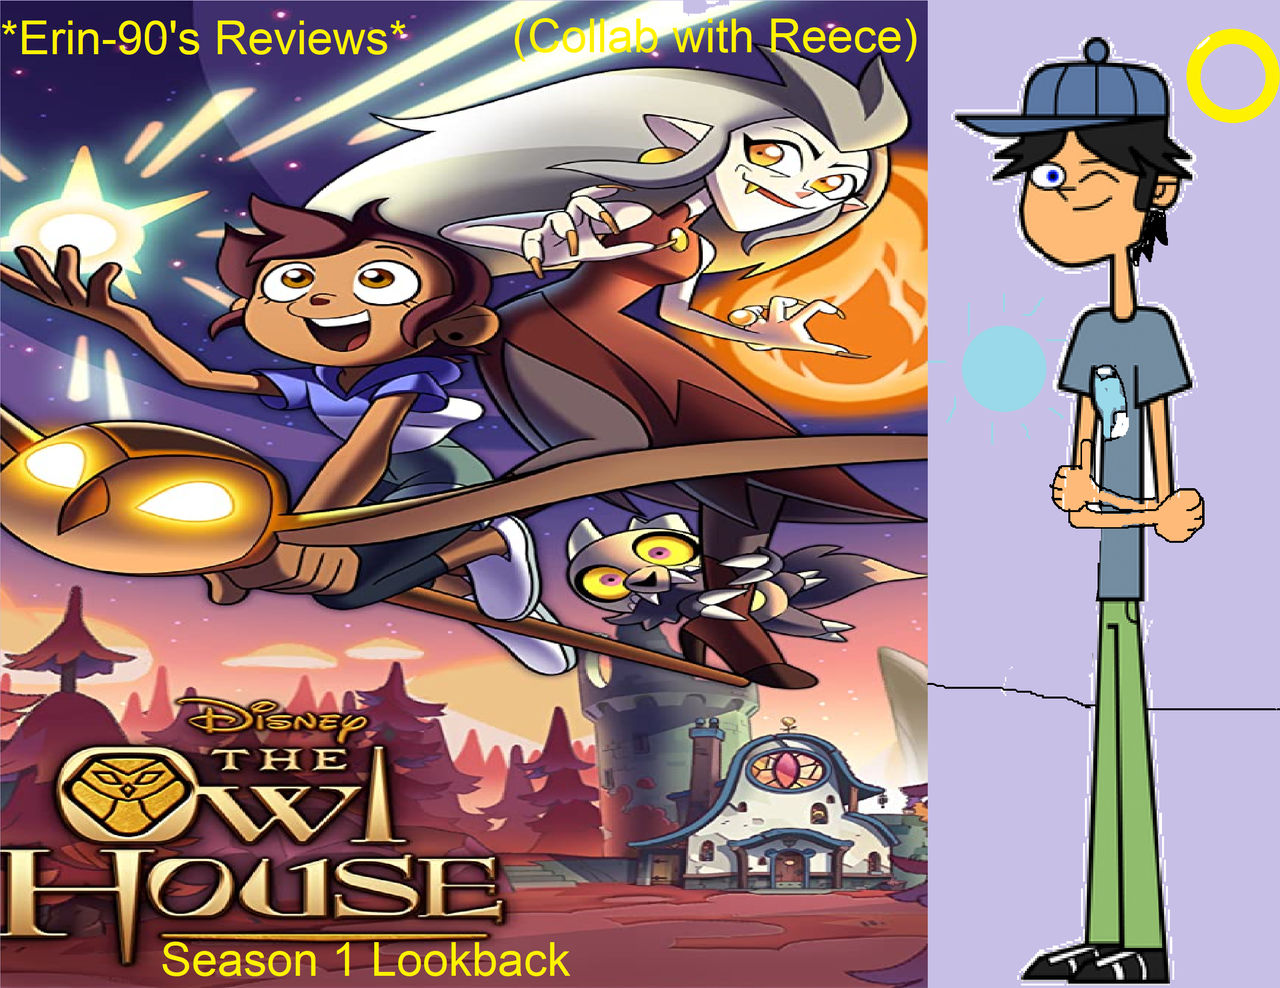 The Owl House: Season One Overview by Jeremy-The-Guy on DeviantArt